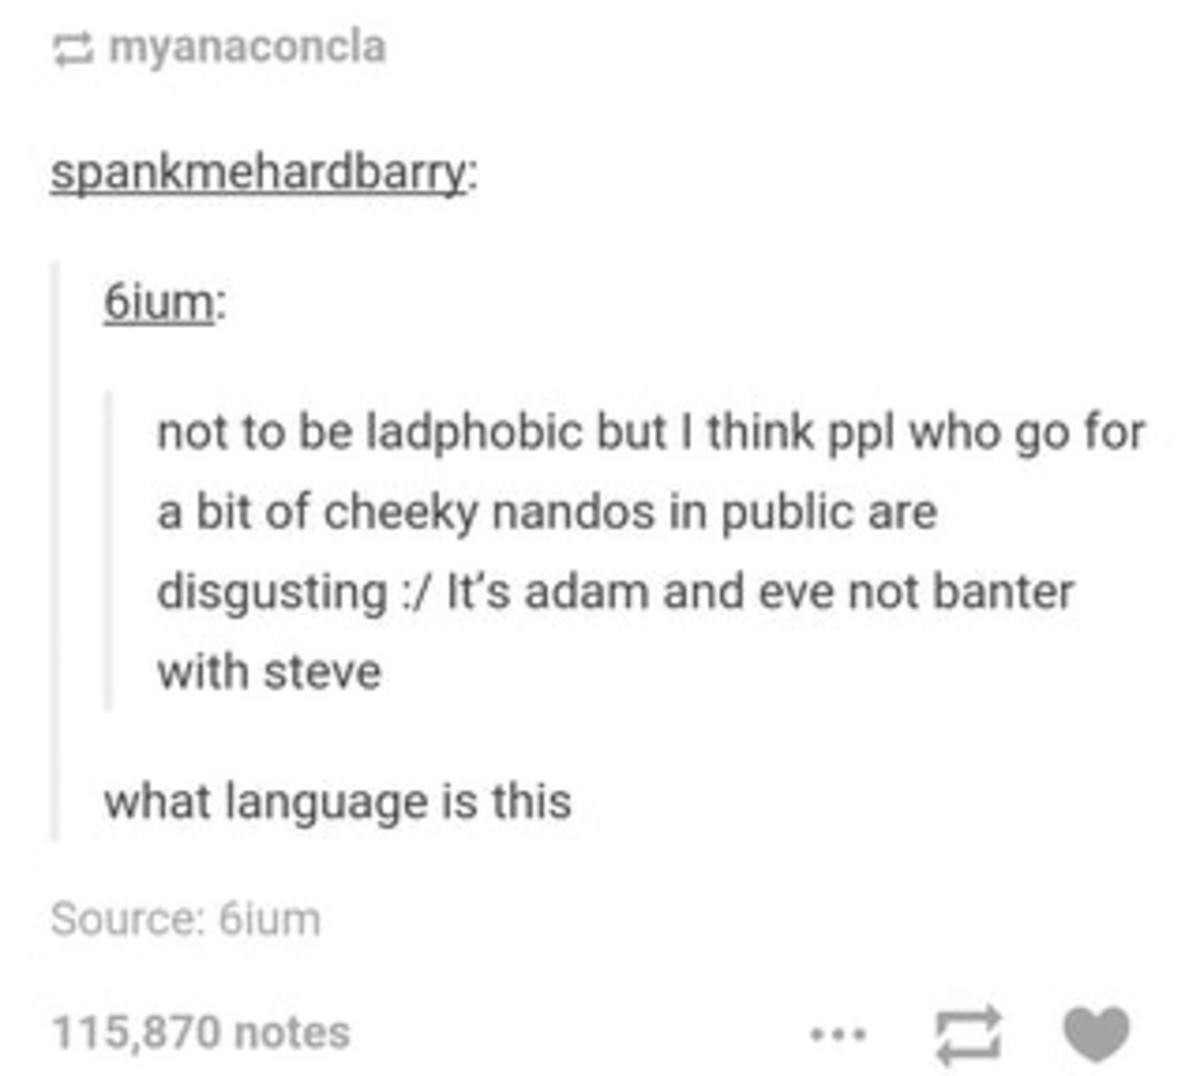 Weird alien language. . not to be but I think ppl who go for a bit of cheeky nando: -5 in public are disgusting at its adam and are not banter with stave what l